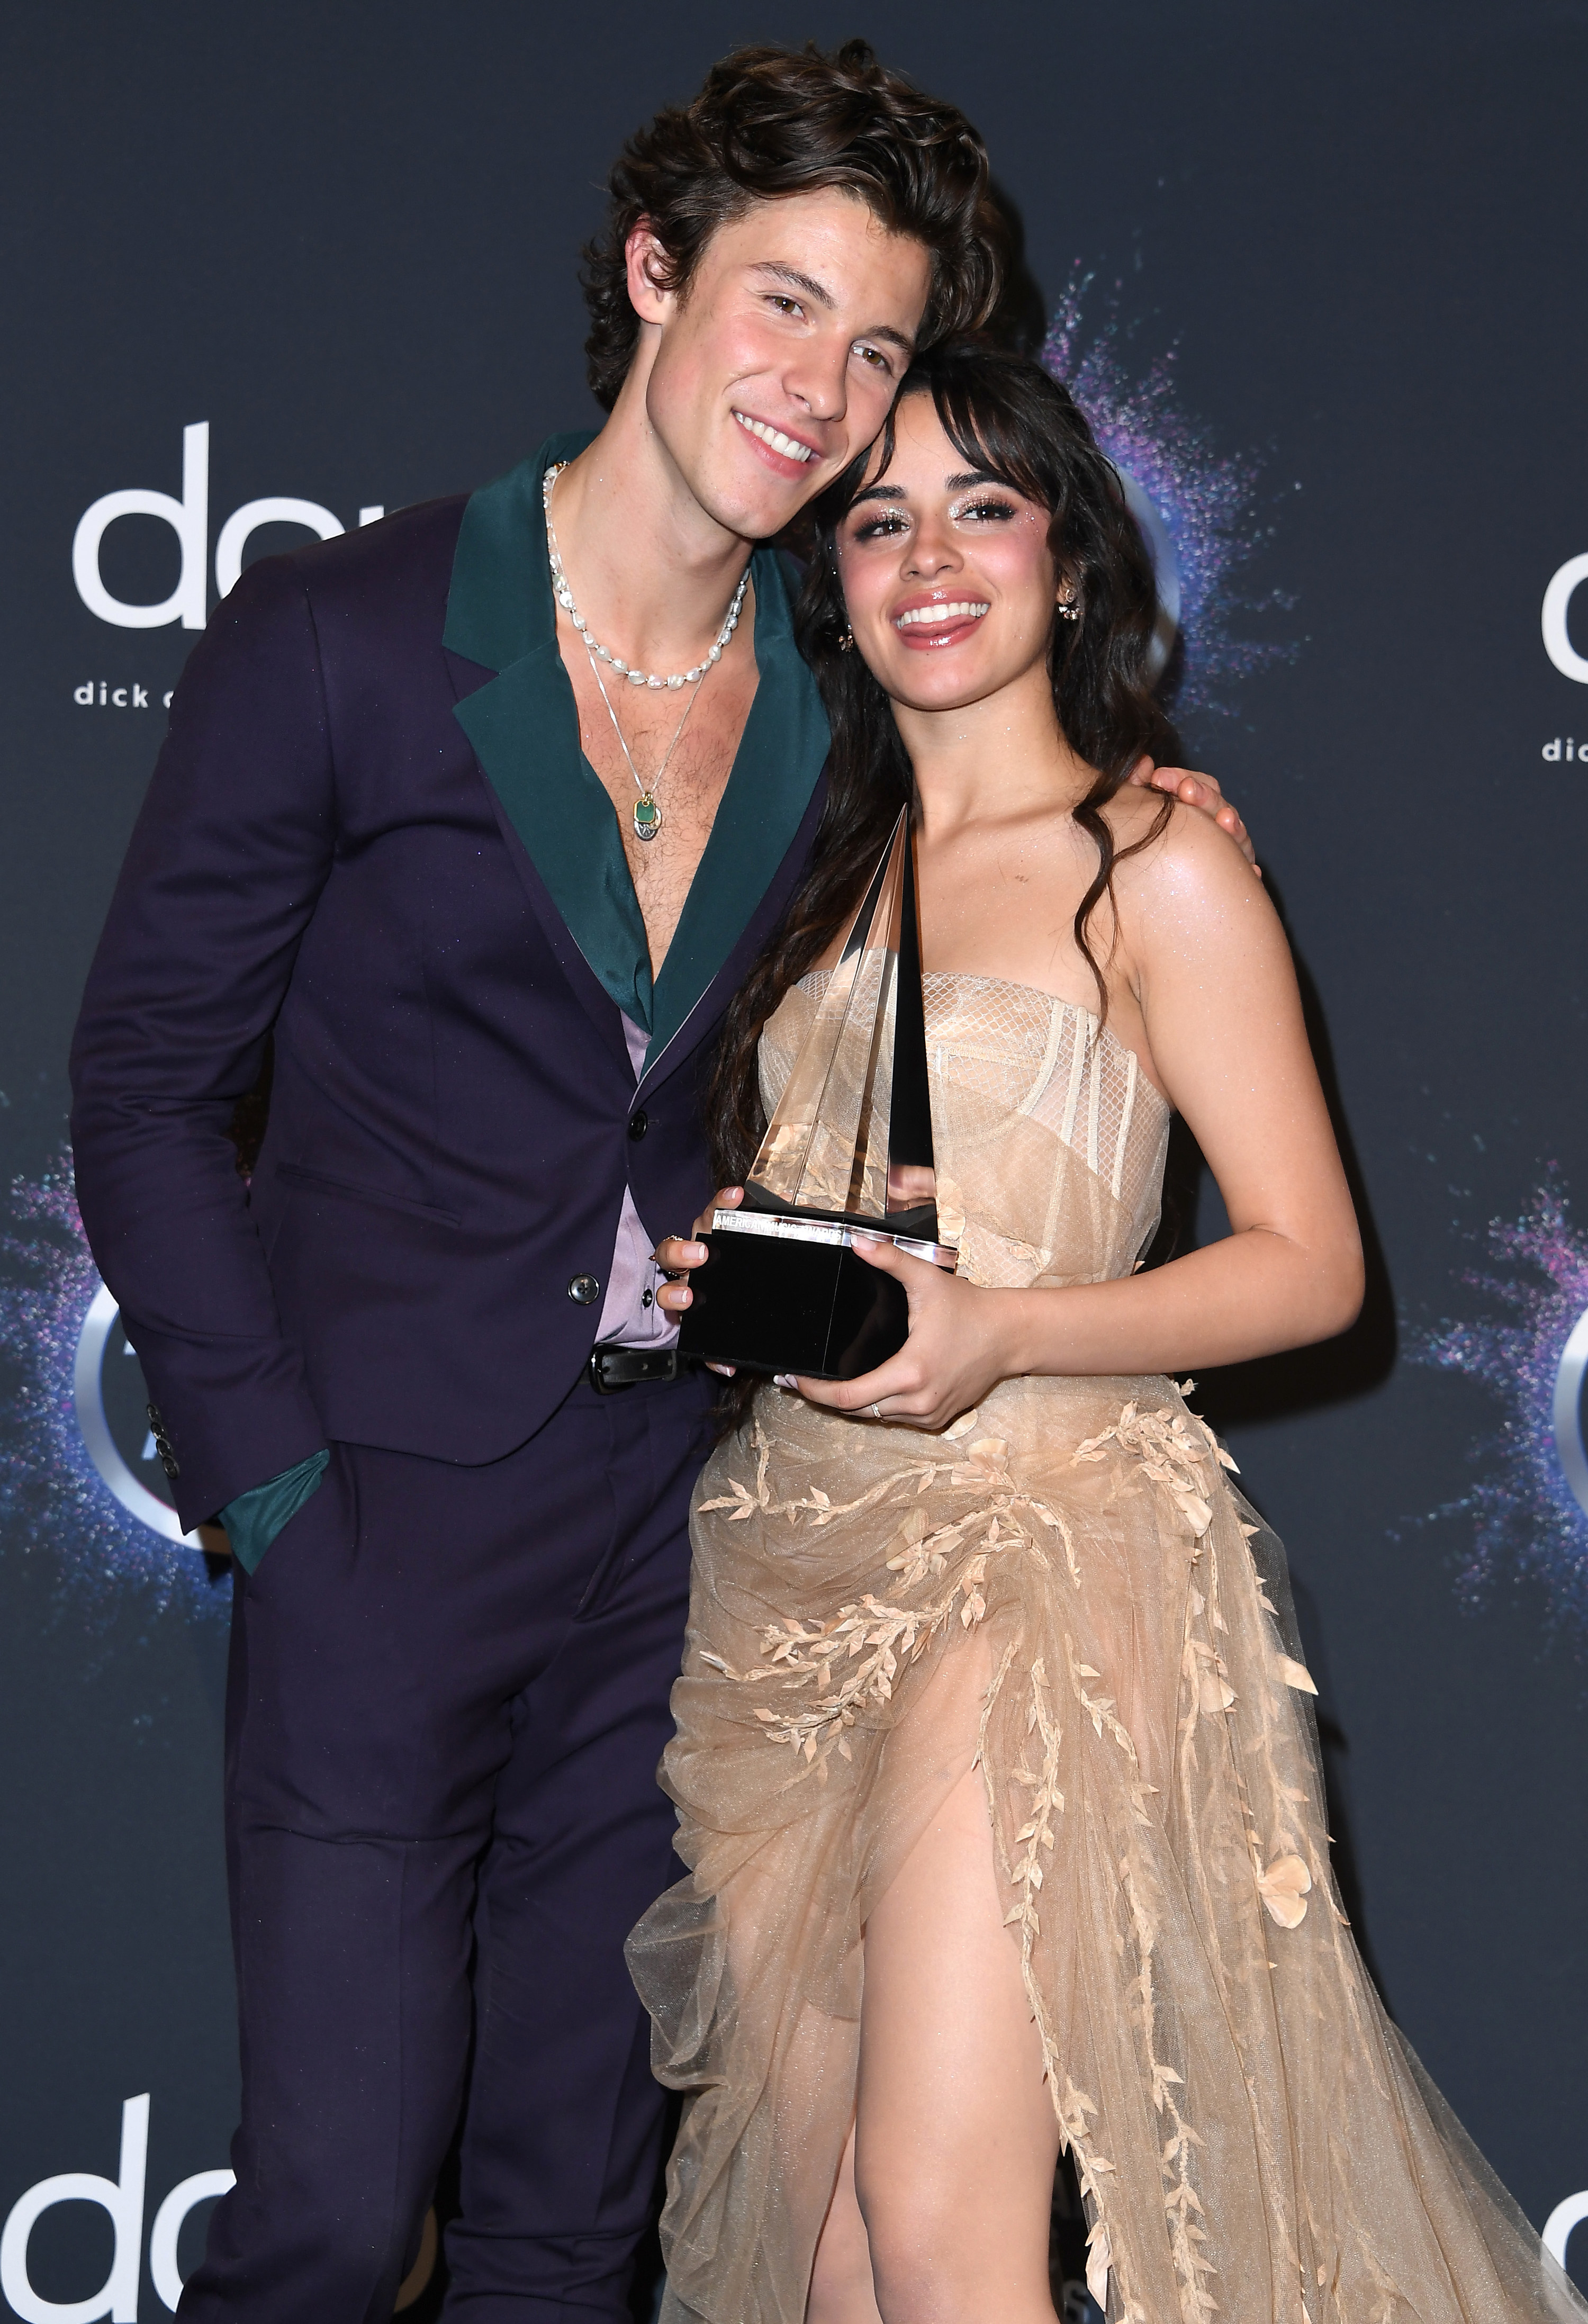 Shawn Mendes and Camila Cabello pose at the 2019 American Music Awards at Microsoft Theater in Los Angeles